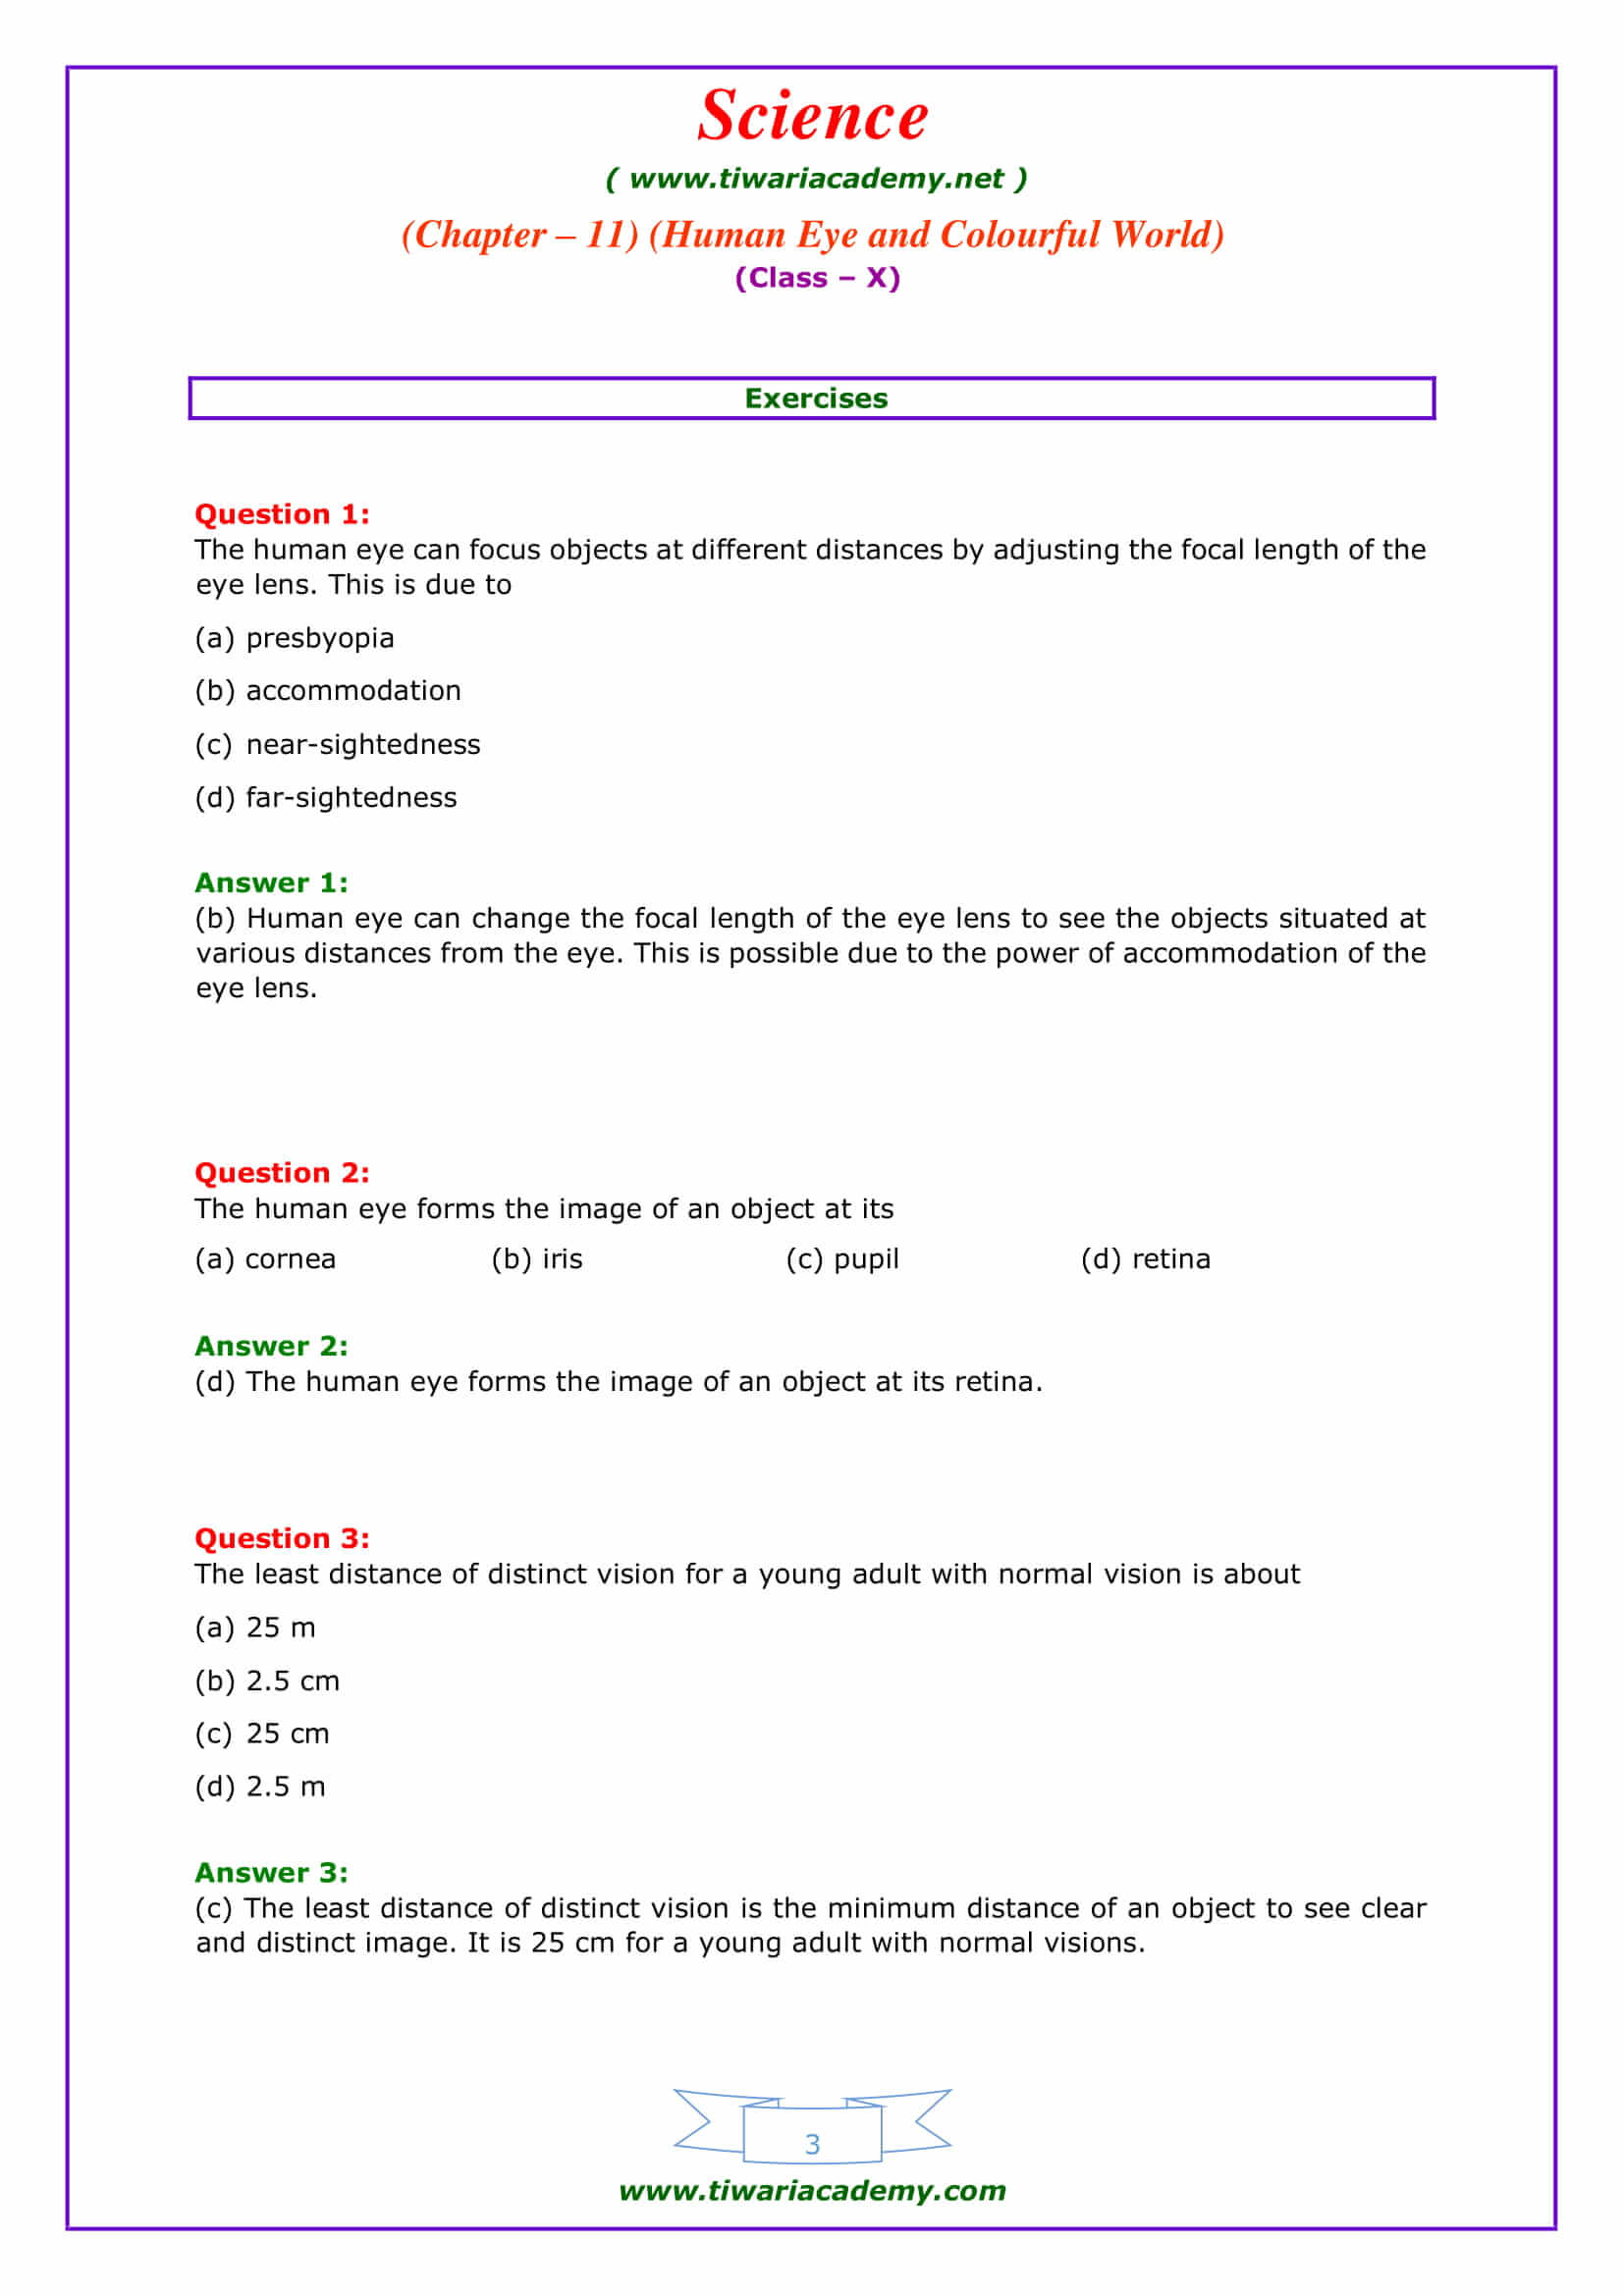 NCERT Solutions for Class 10 Science Chapter 11 Human eye and colorful world Exercises